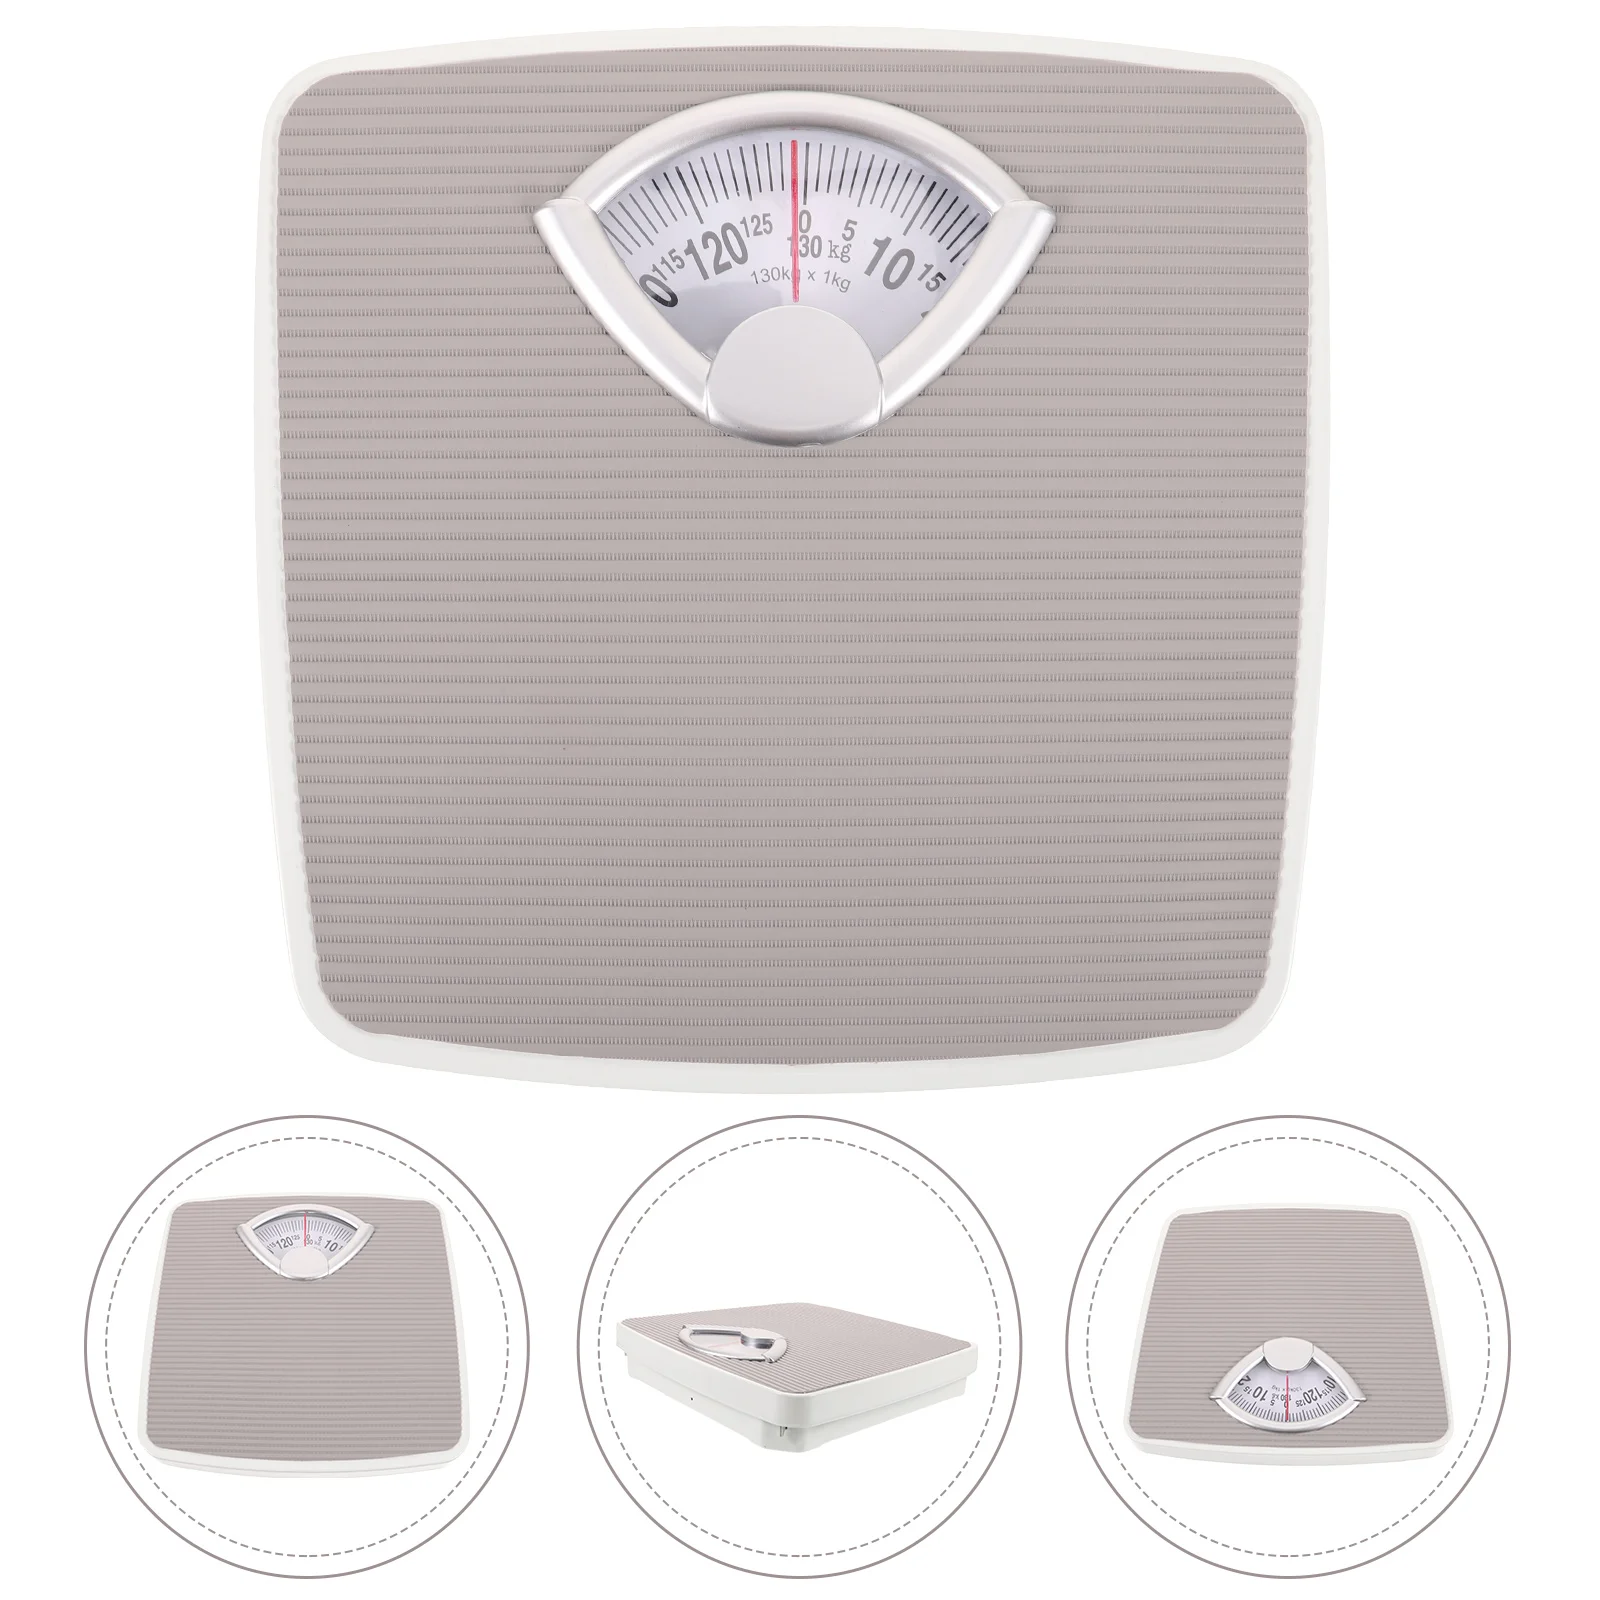 

Mechanical Digital Scales for Body Weight Electronic Fat Measure Iron Accurate Weighing